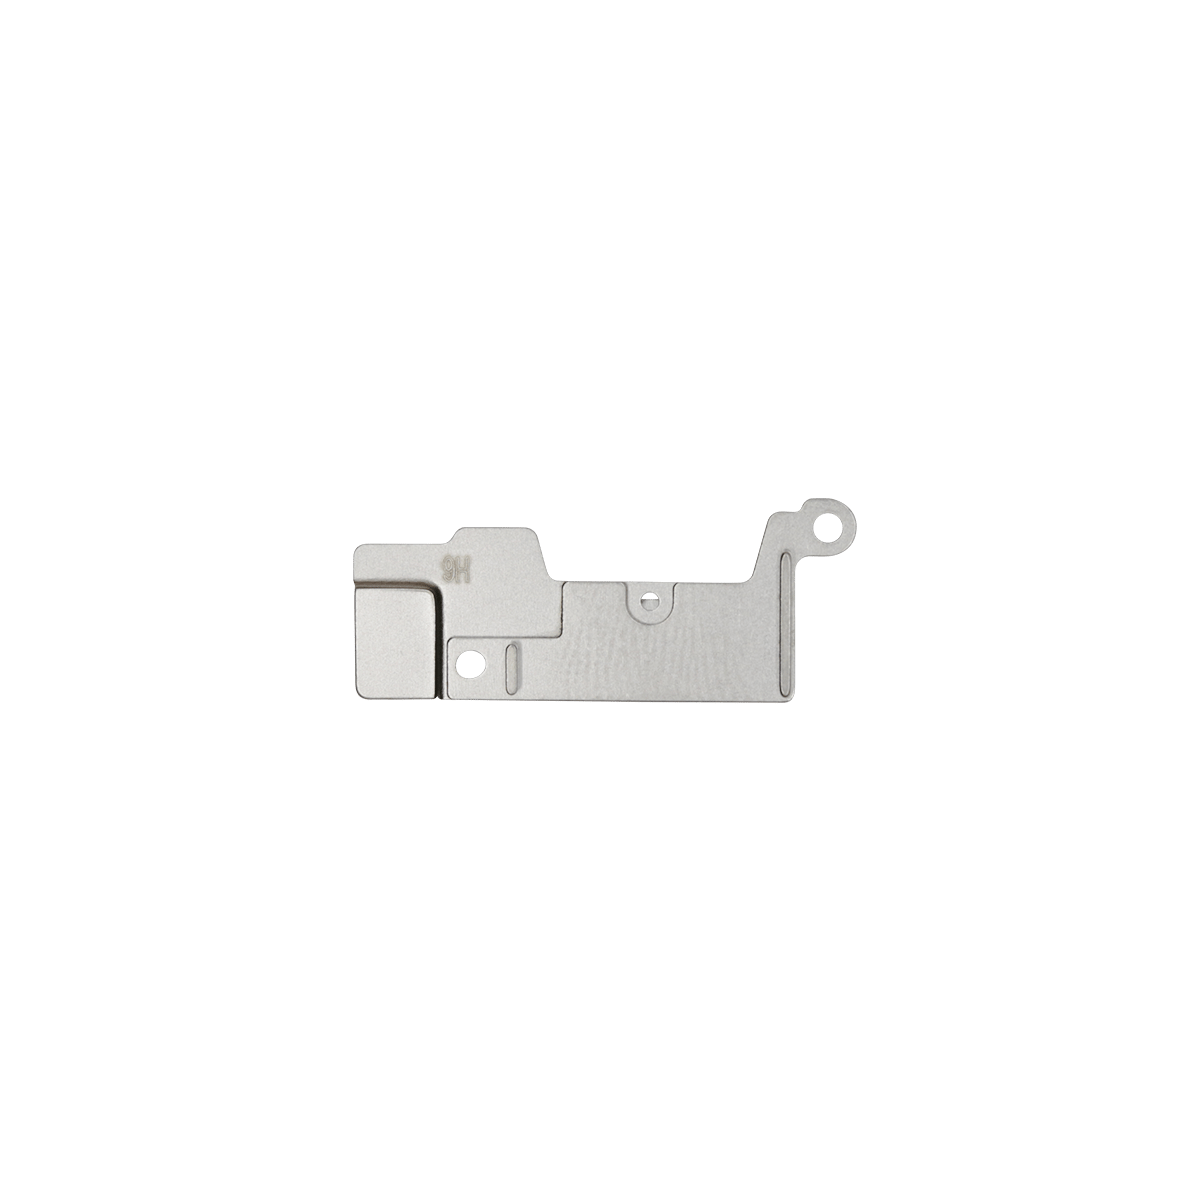 iPhone 6s Plus Home Button Metal Bracket Replacement